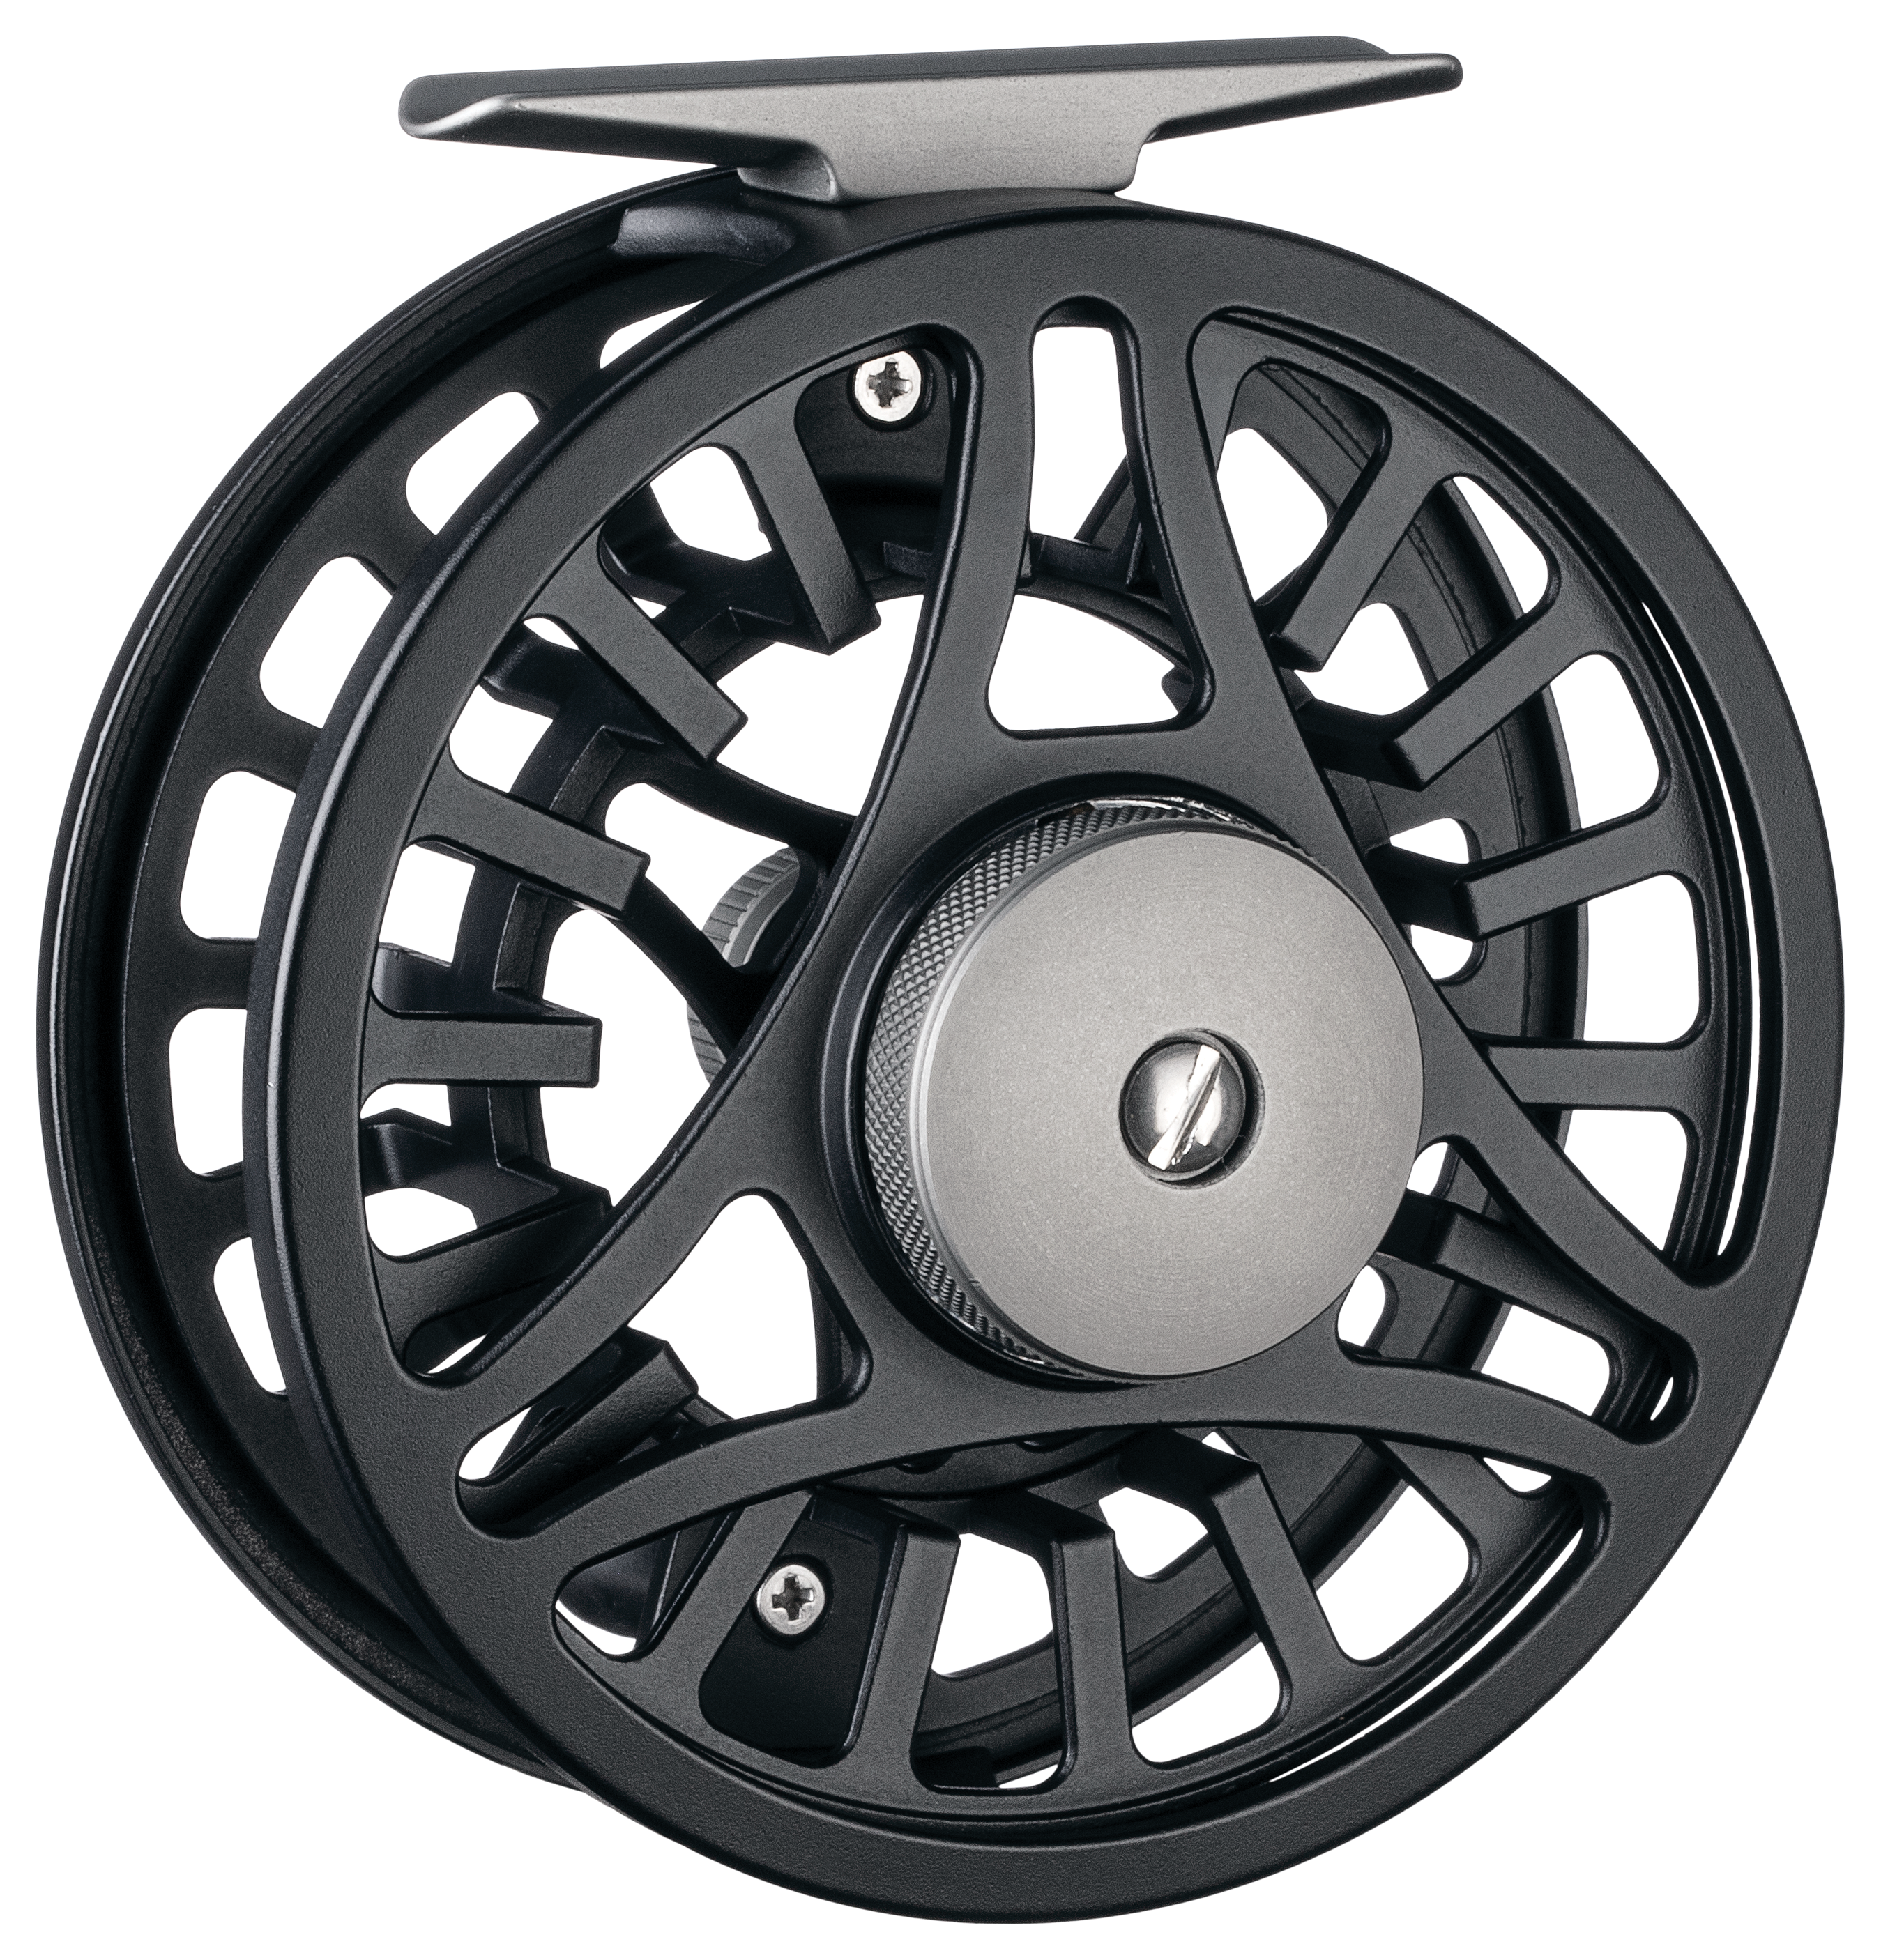 Cabelas CR-67, Classic Fly Reels